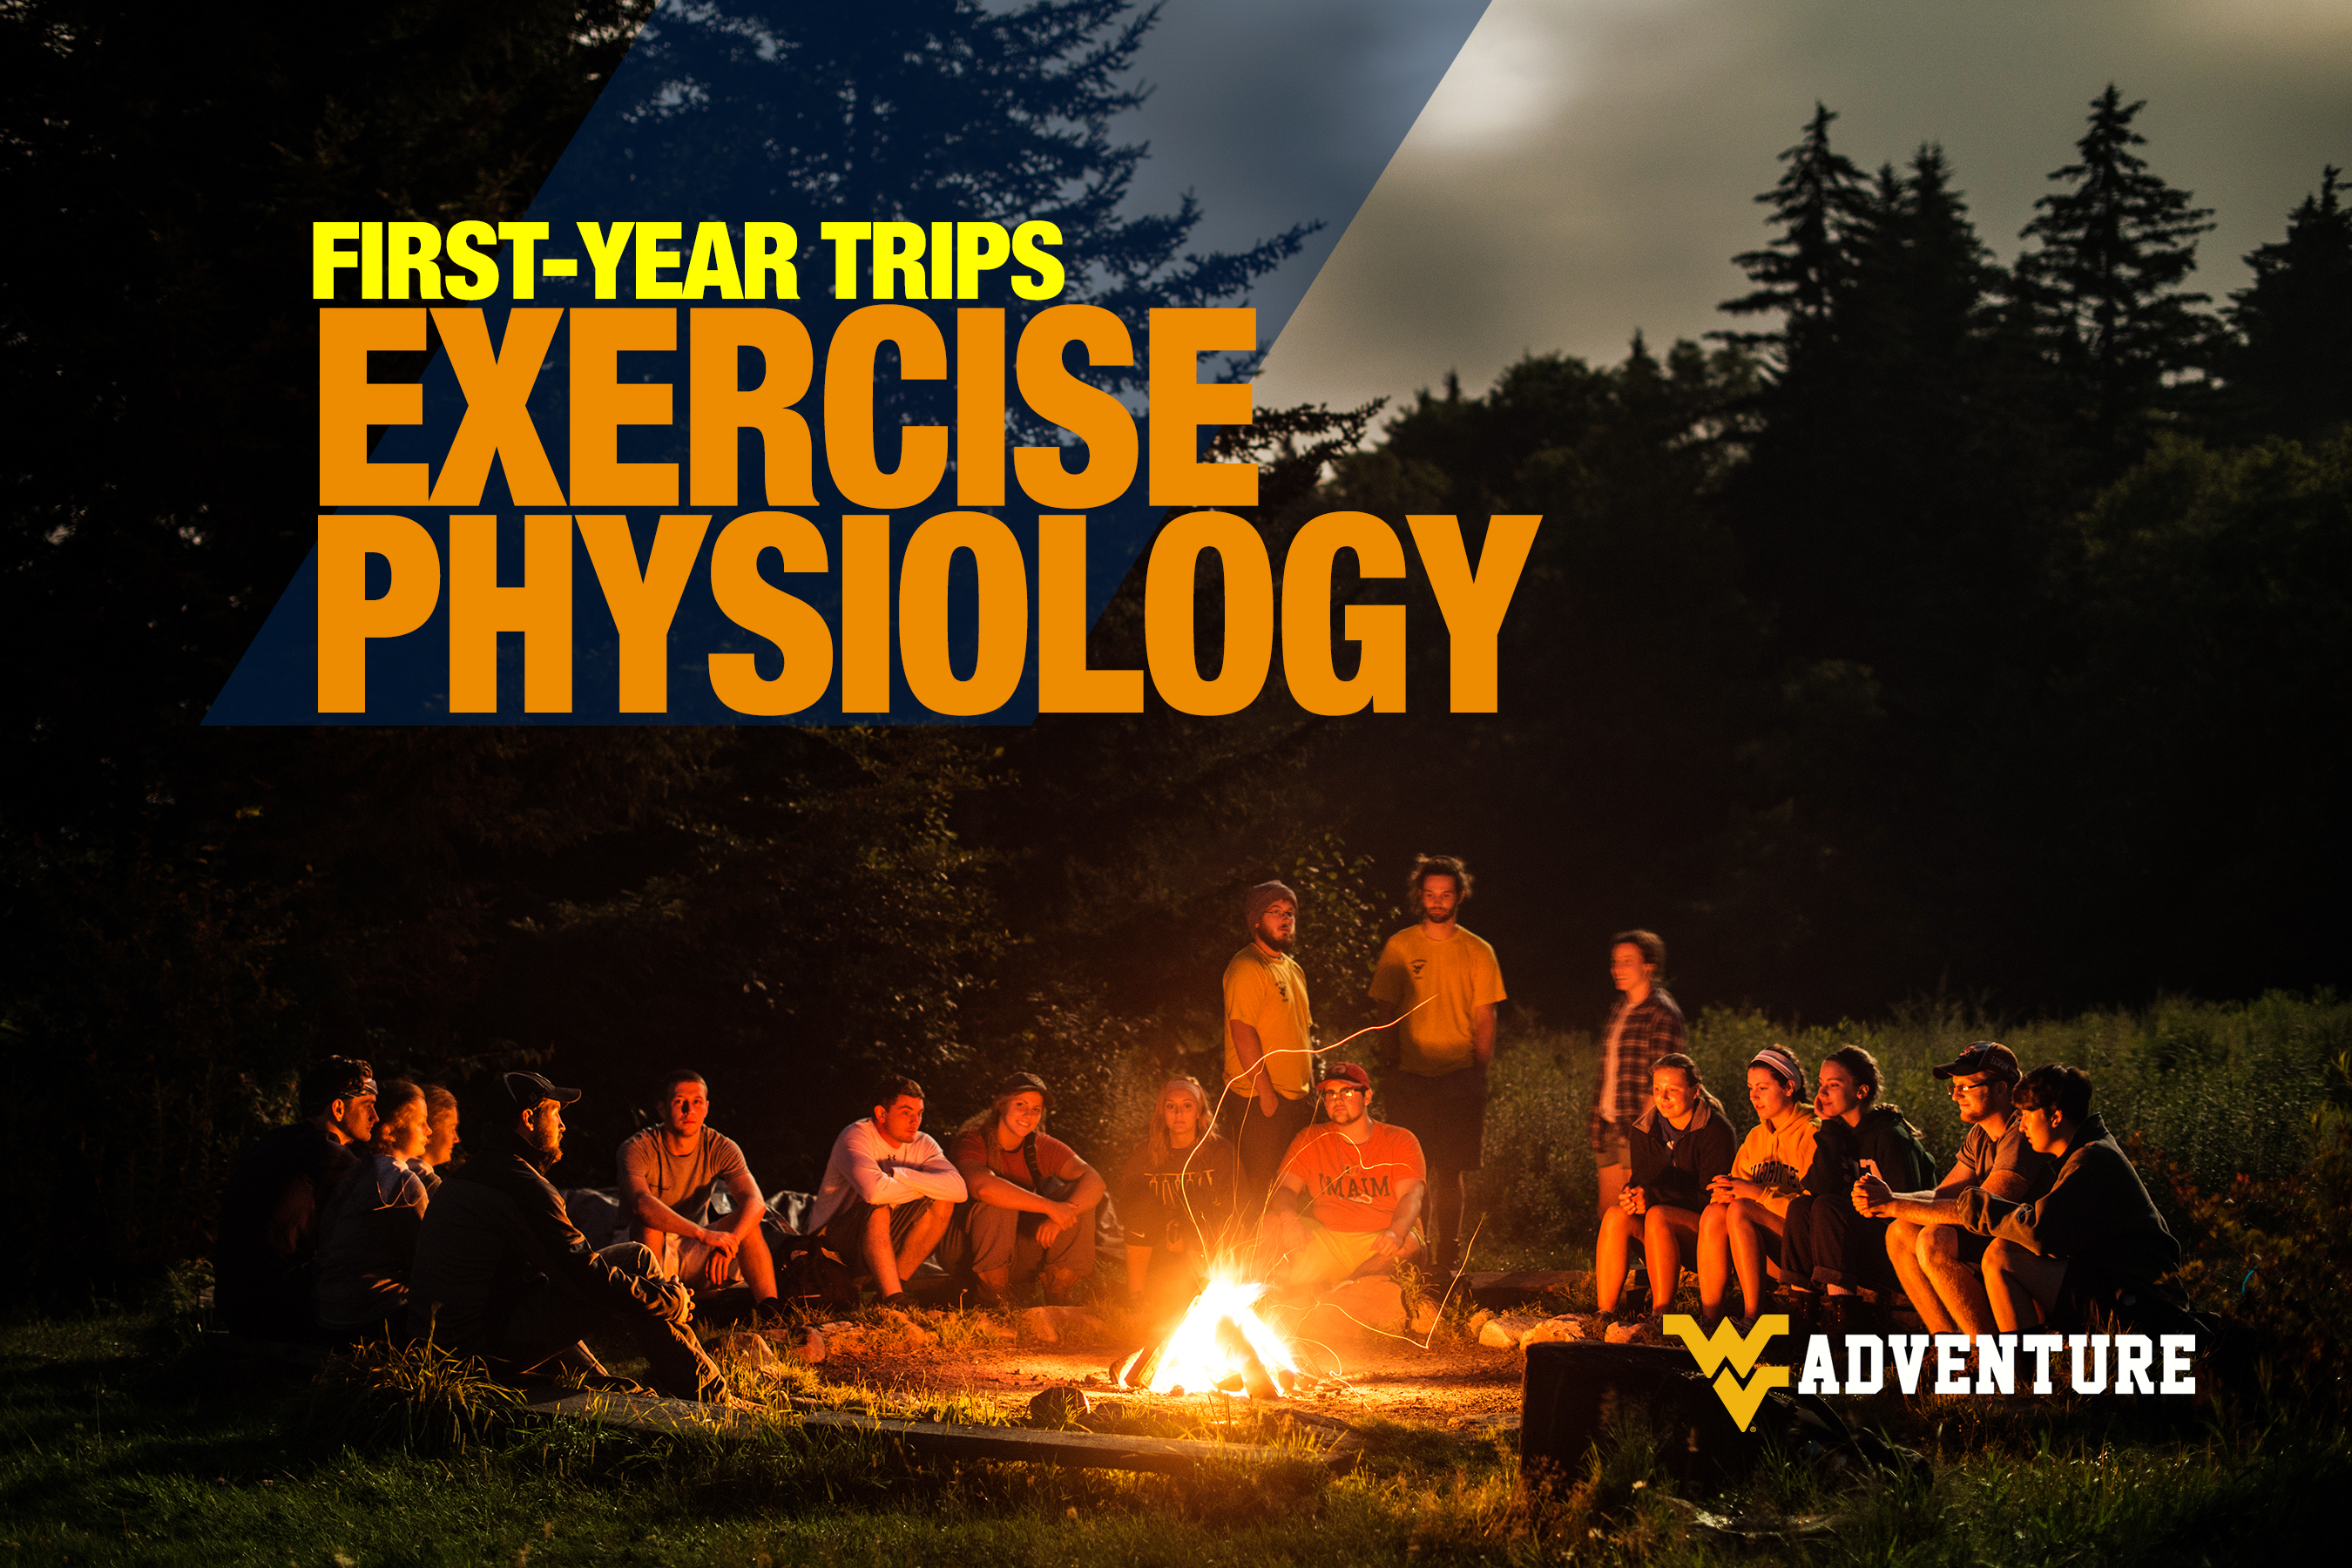 Front of Adventure WV flyer about first-year trips for Exercise Physiology students